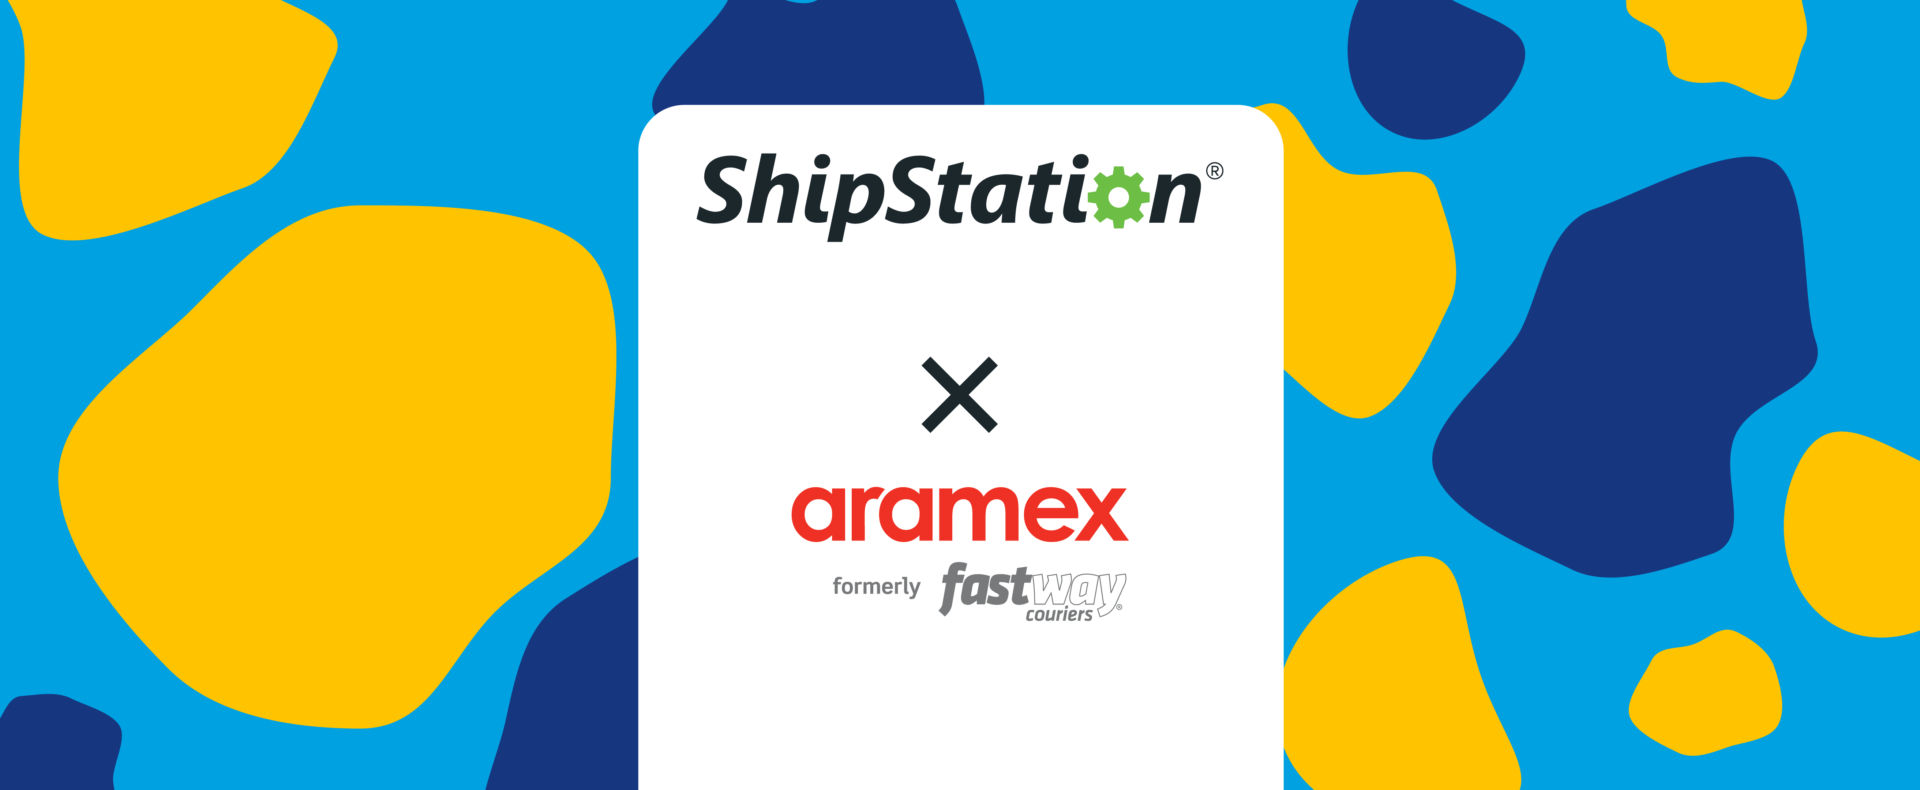 aramex and shipstation graphic